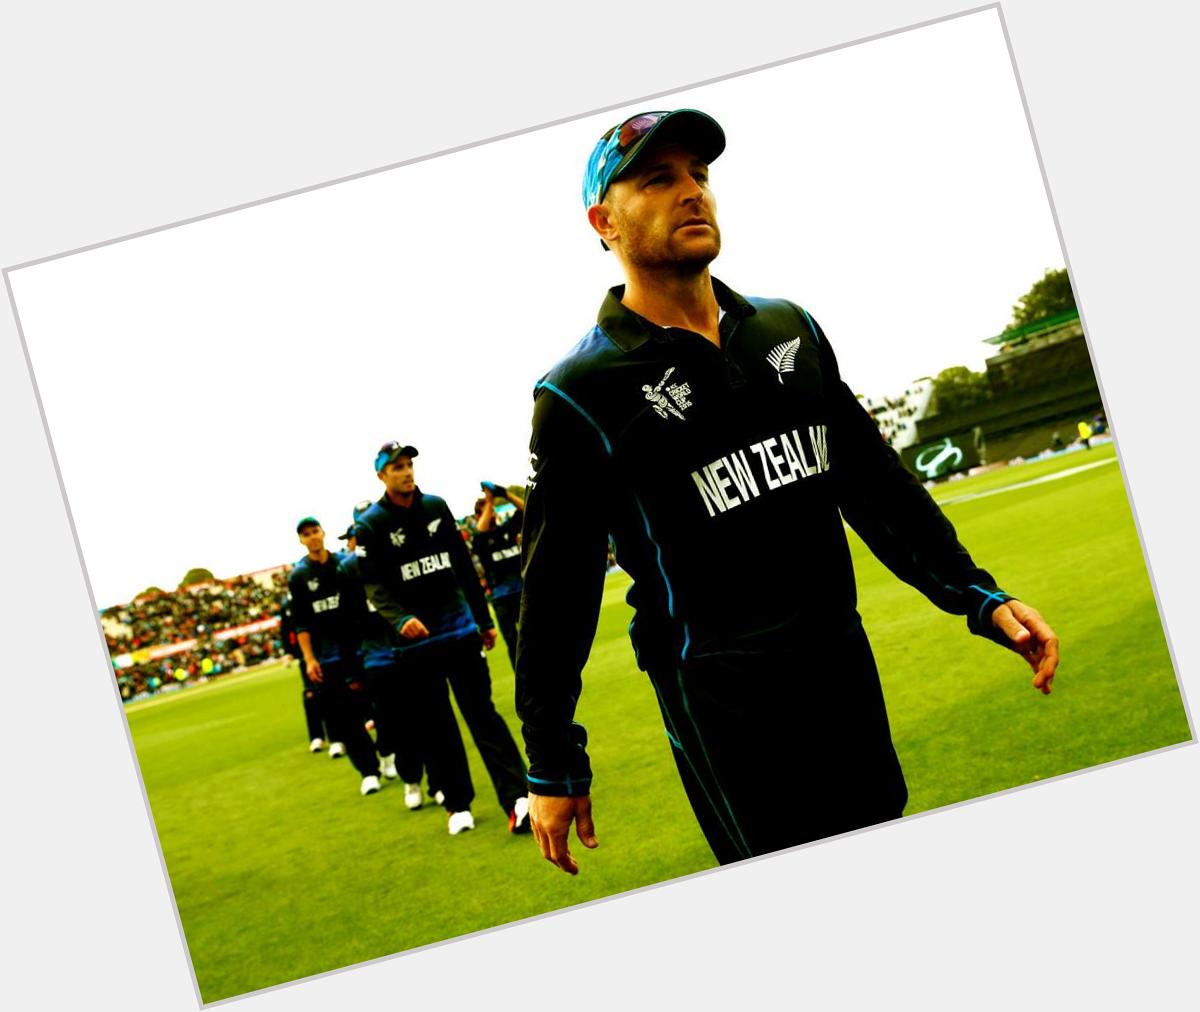 Happy birthday Brendon mccullum.still one of the greatest in all formats of the game. 